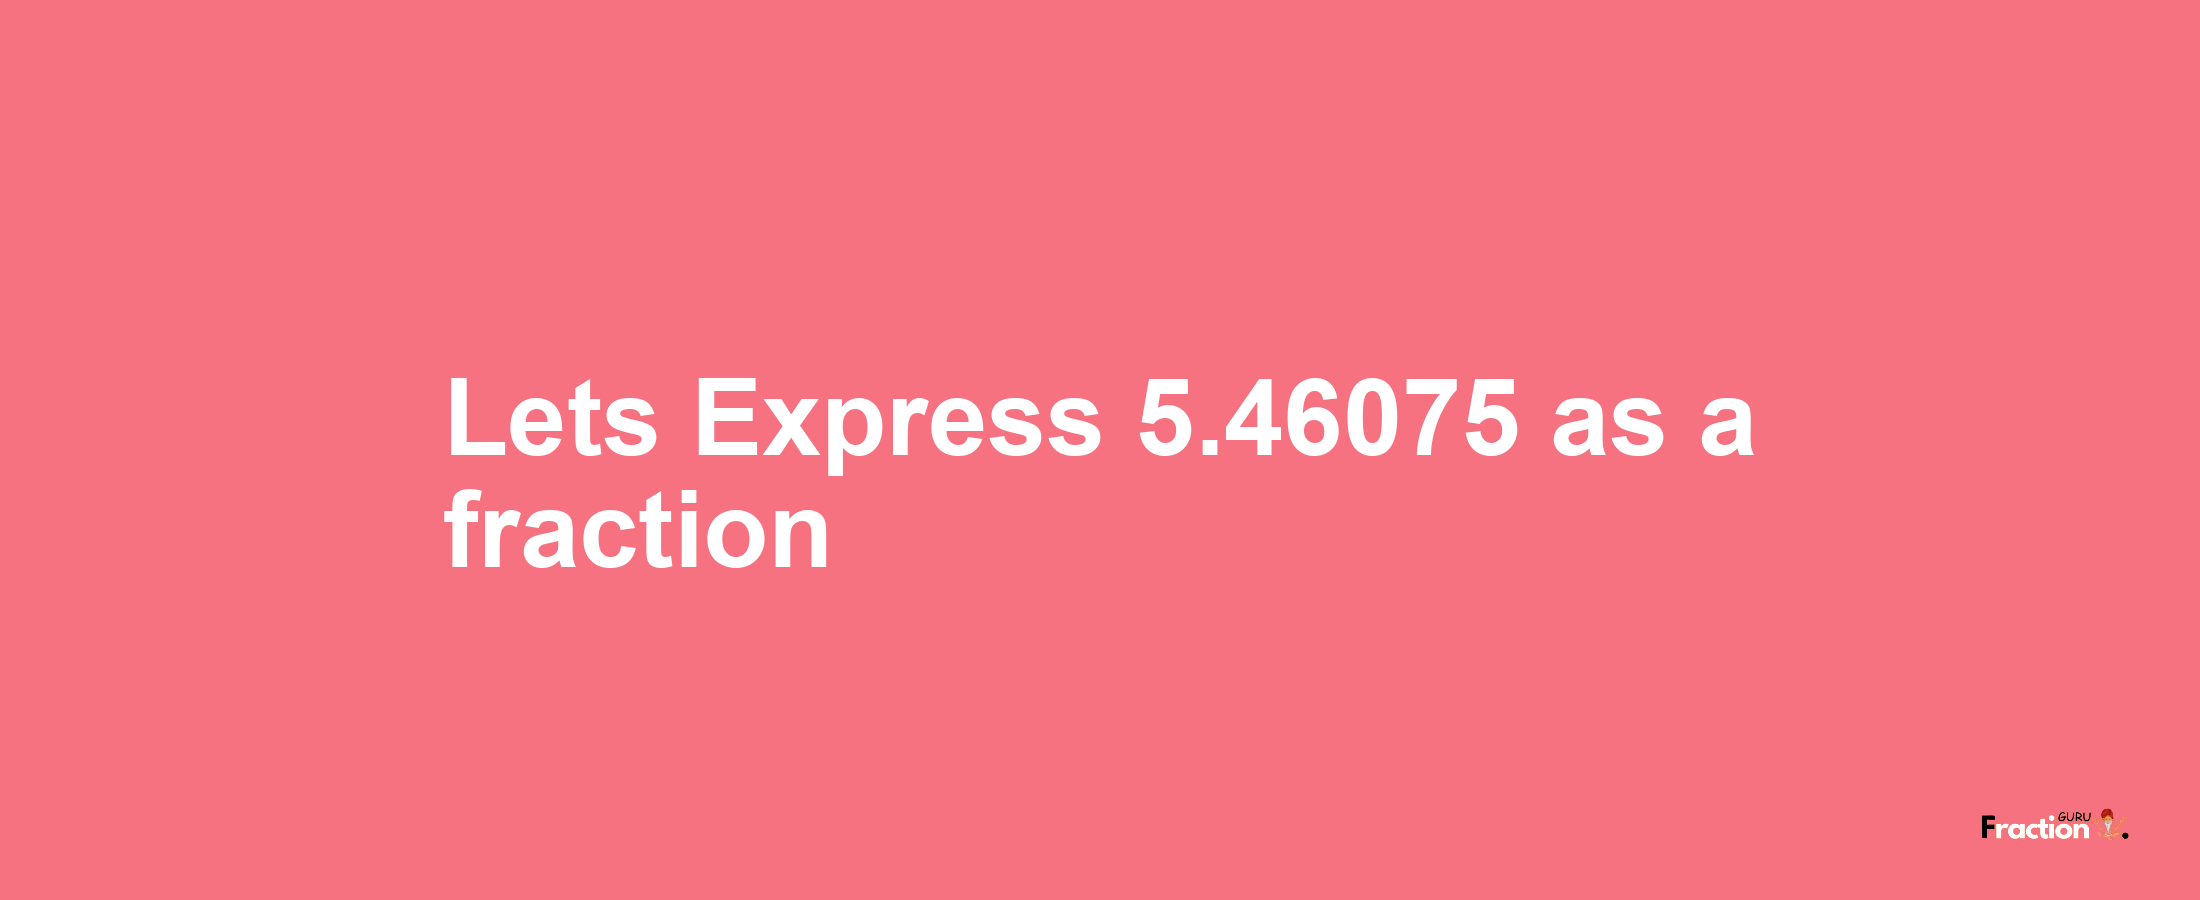 Lets Express 5.46075 as afraction